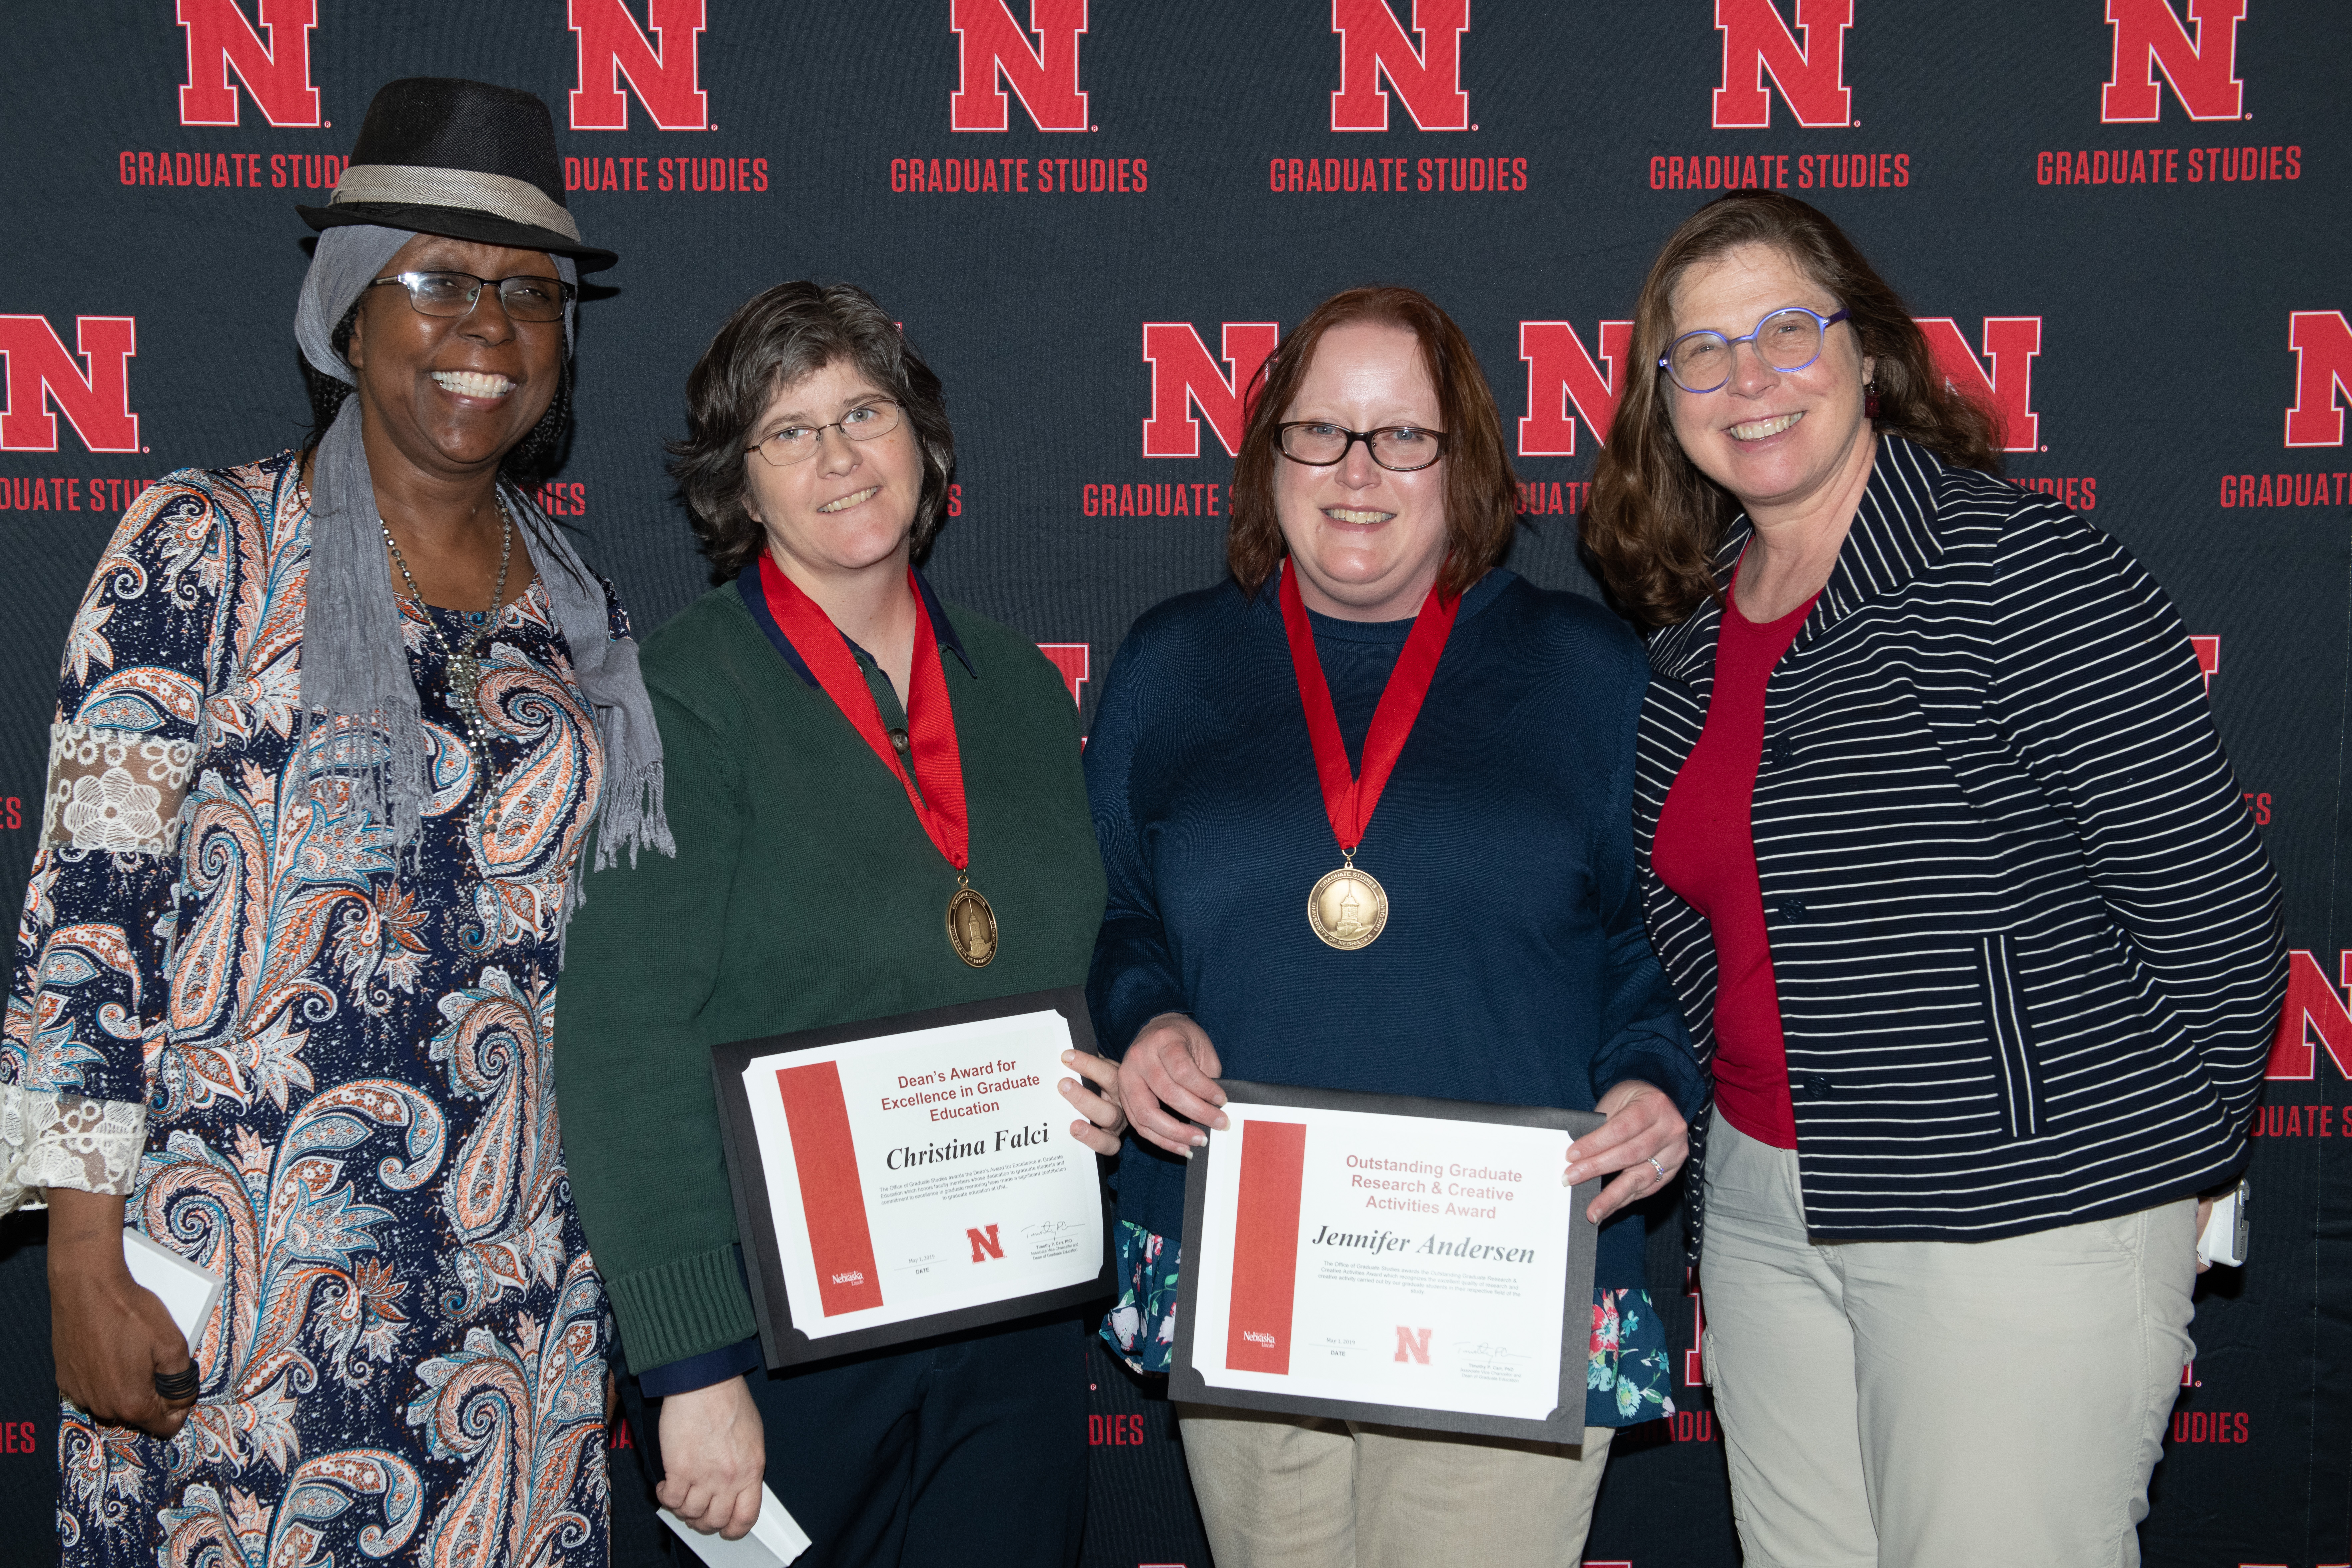 Falci wins Dean's Award for Excellence in Graduate Education; Andersen wins Outstanding Graduate Research and Creative Activities Award